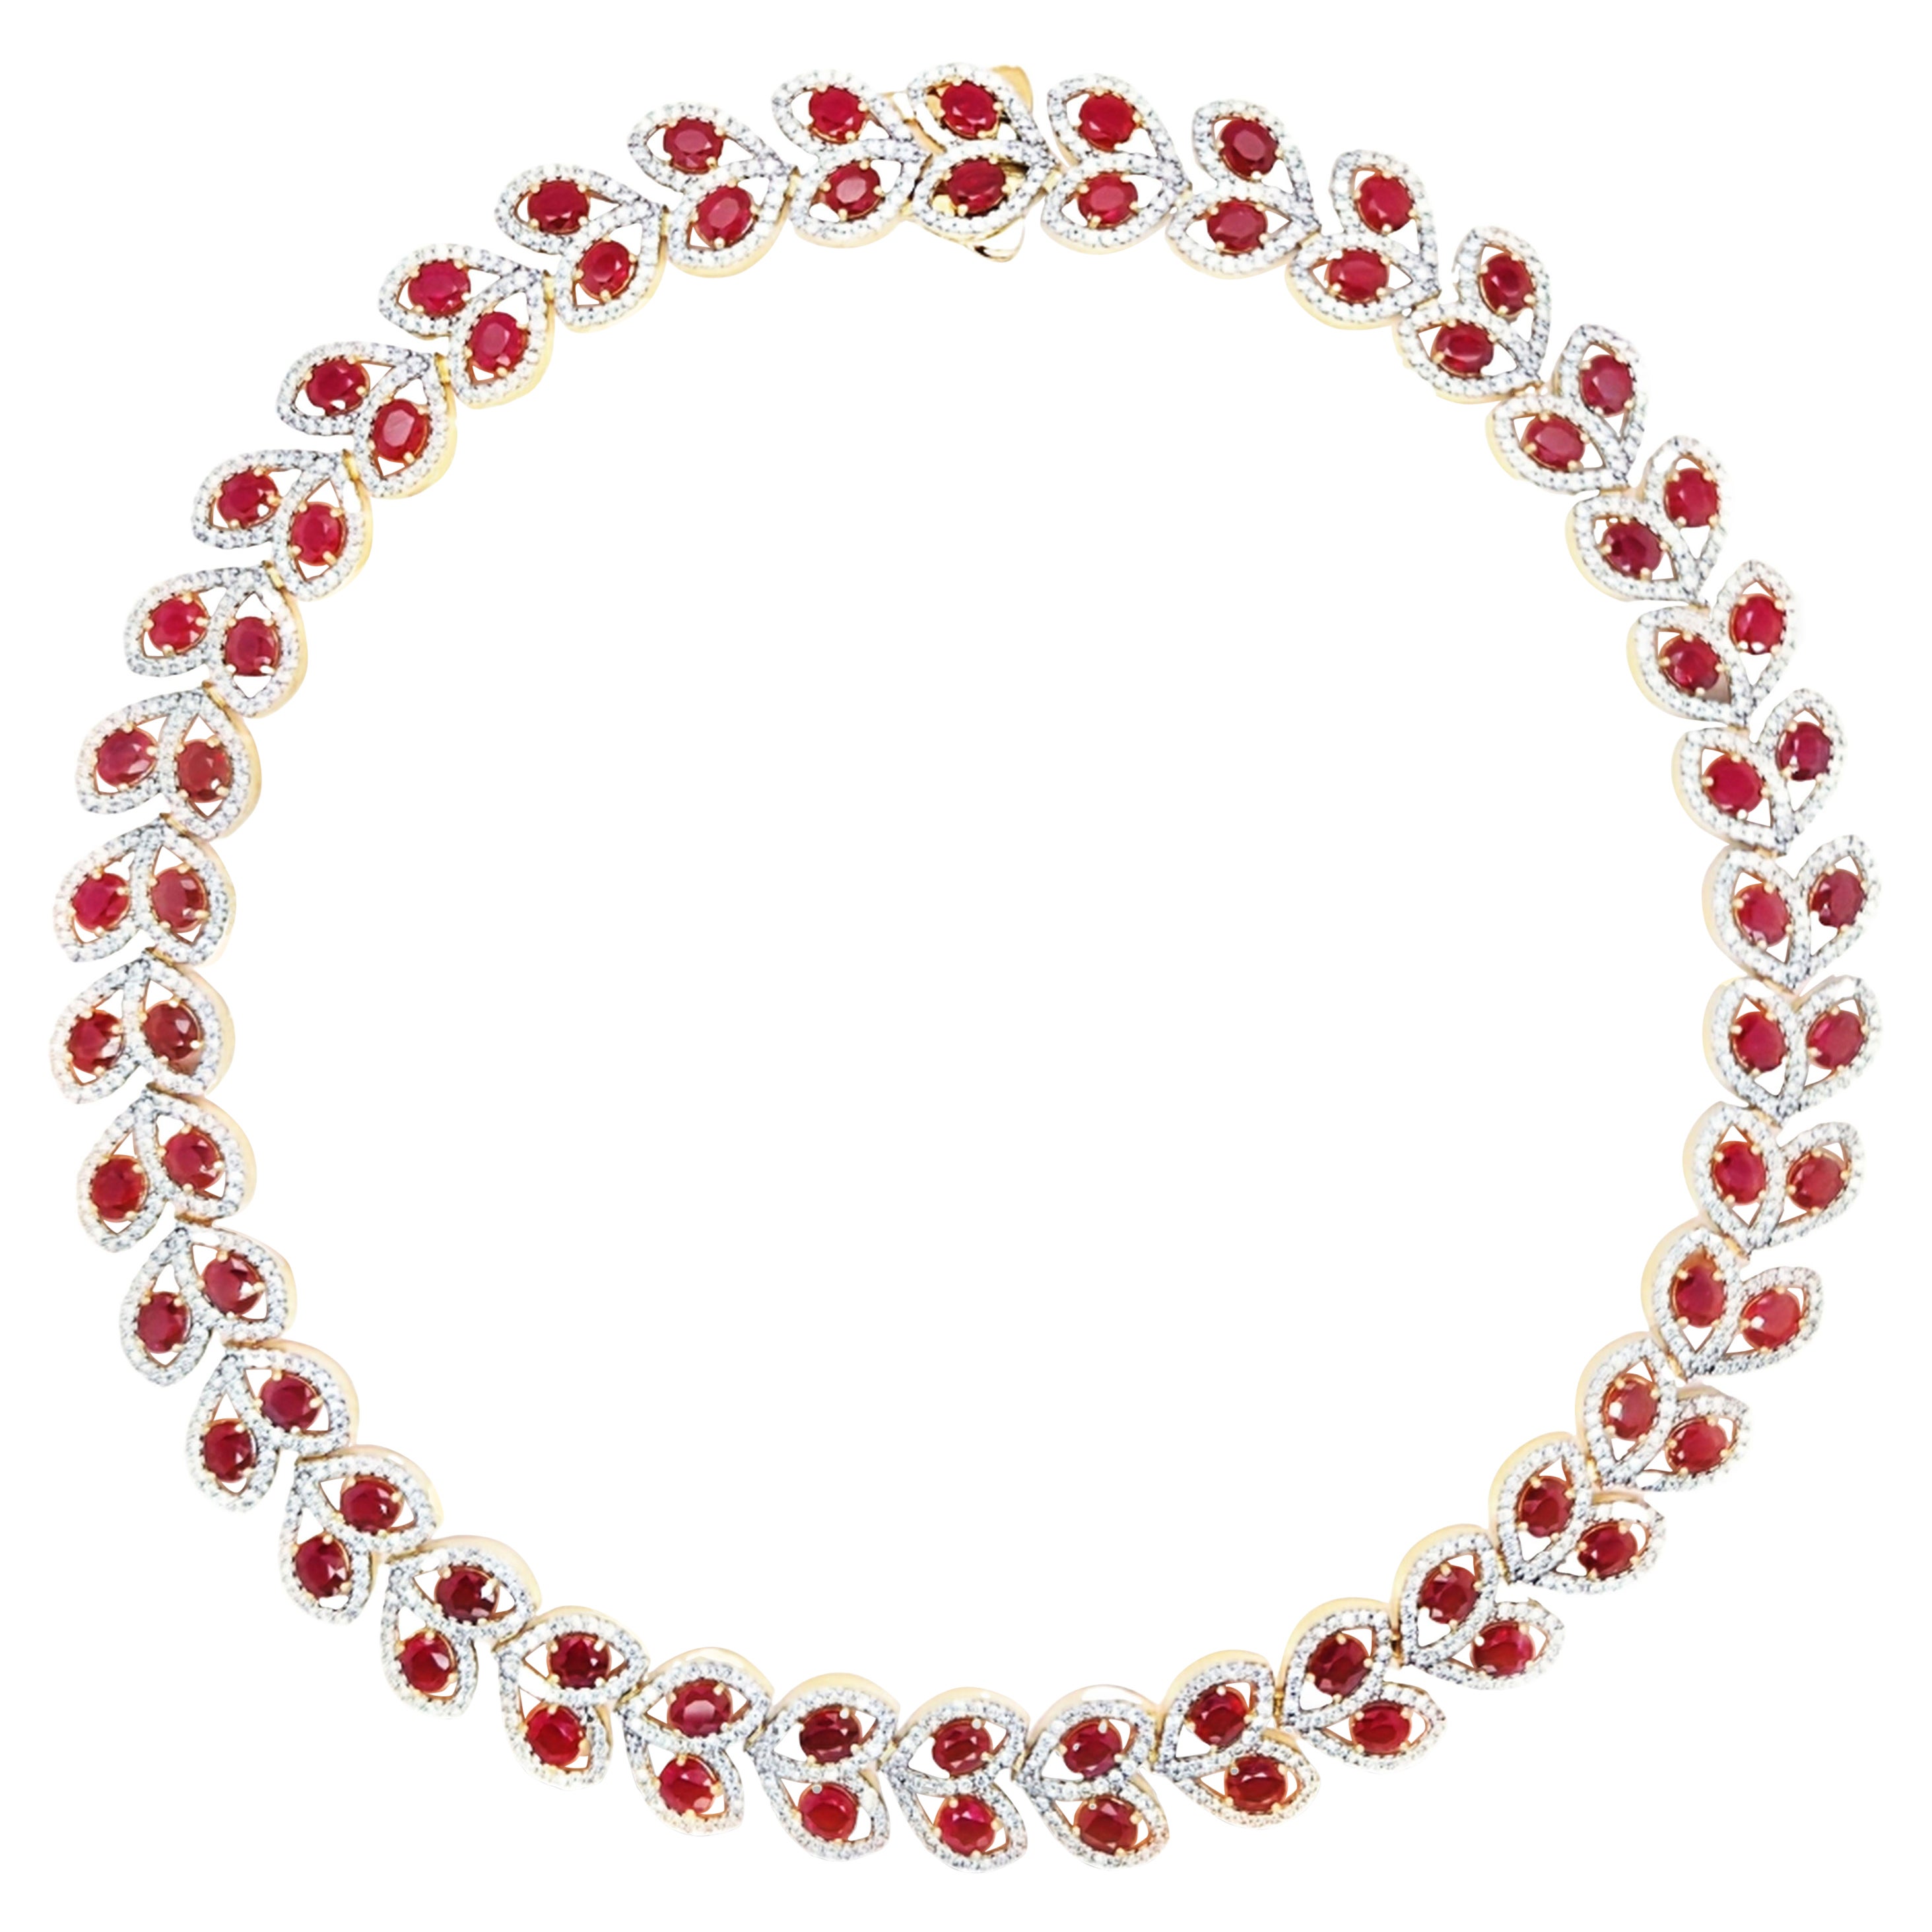 IGI Certified 29.15ct Natural Burma Rubies 9.83ct Natural Diamonds Gold Necklace For Sale